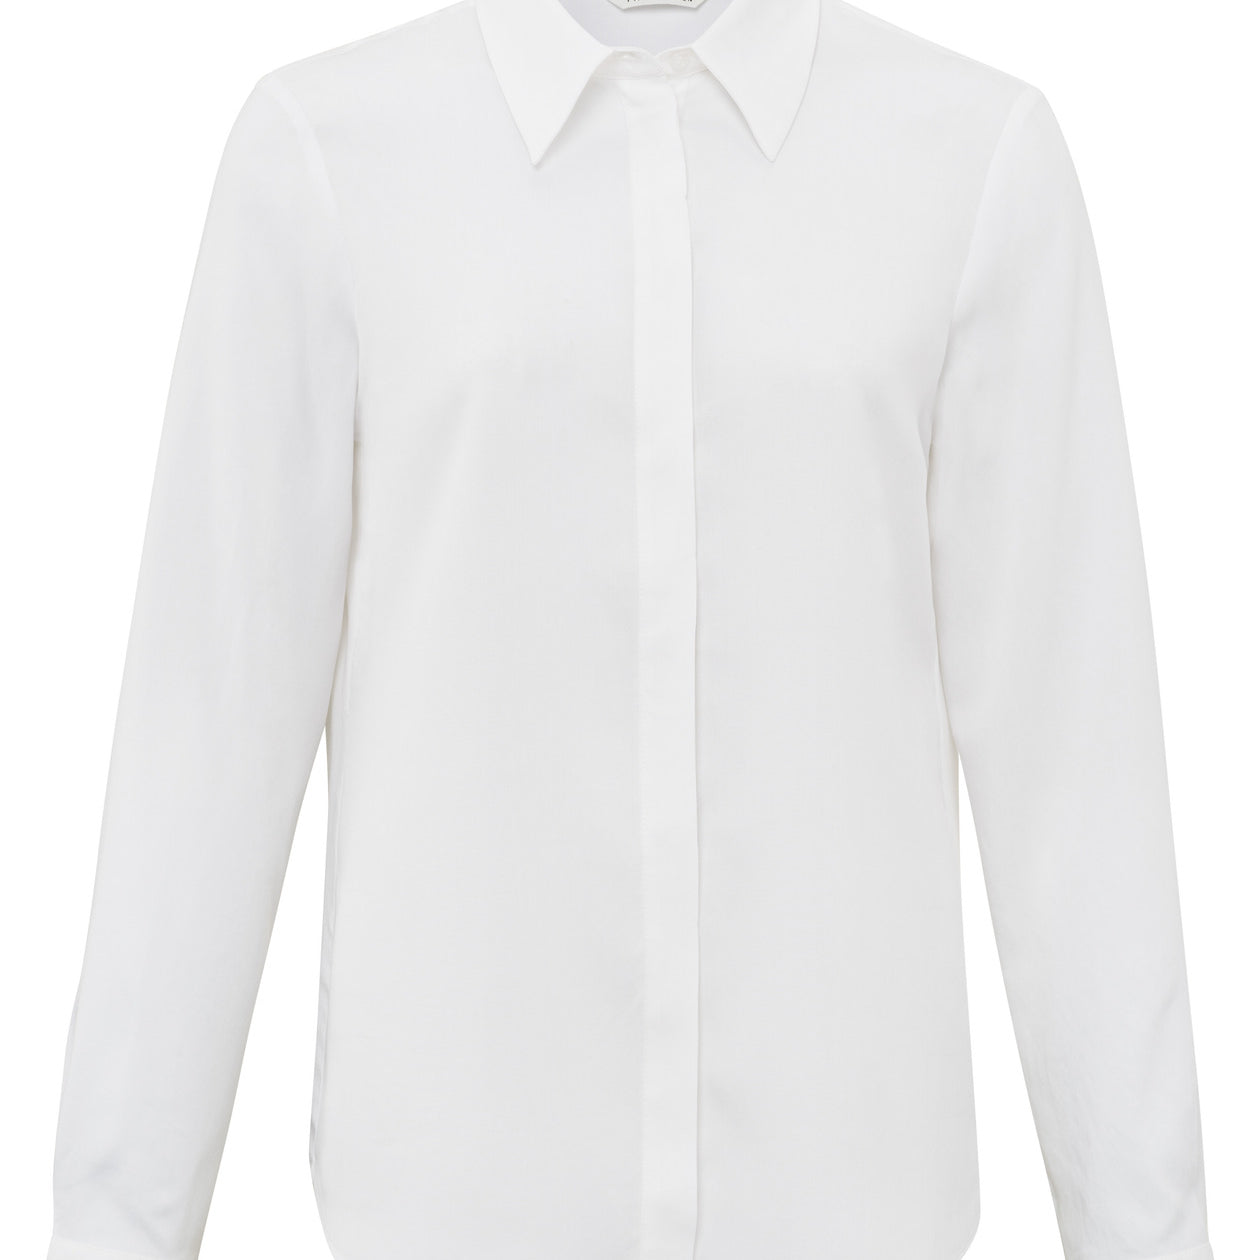 Spring 2024 Yaya soft poplin blouse in white classic basic button up front view